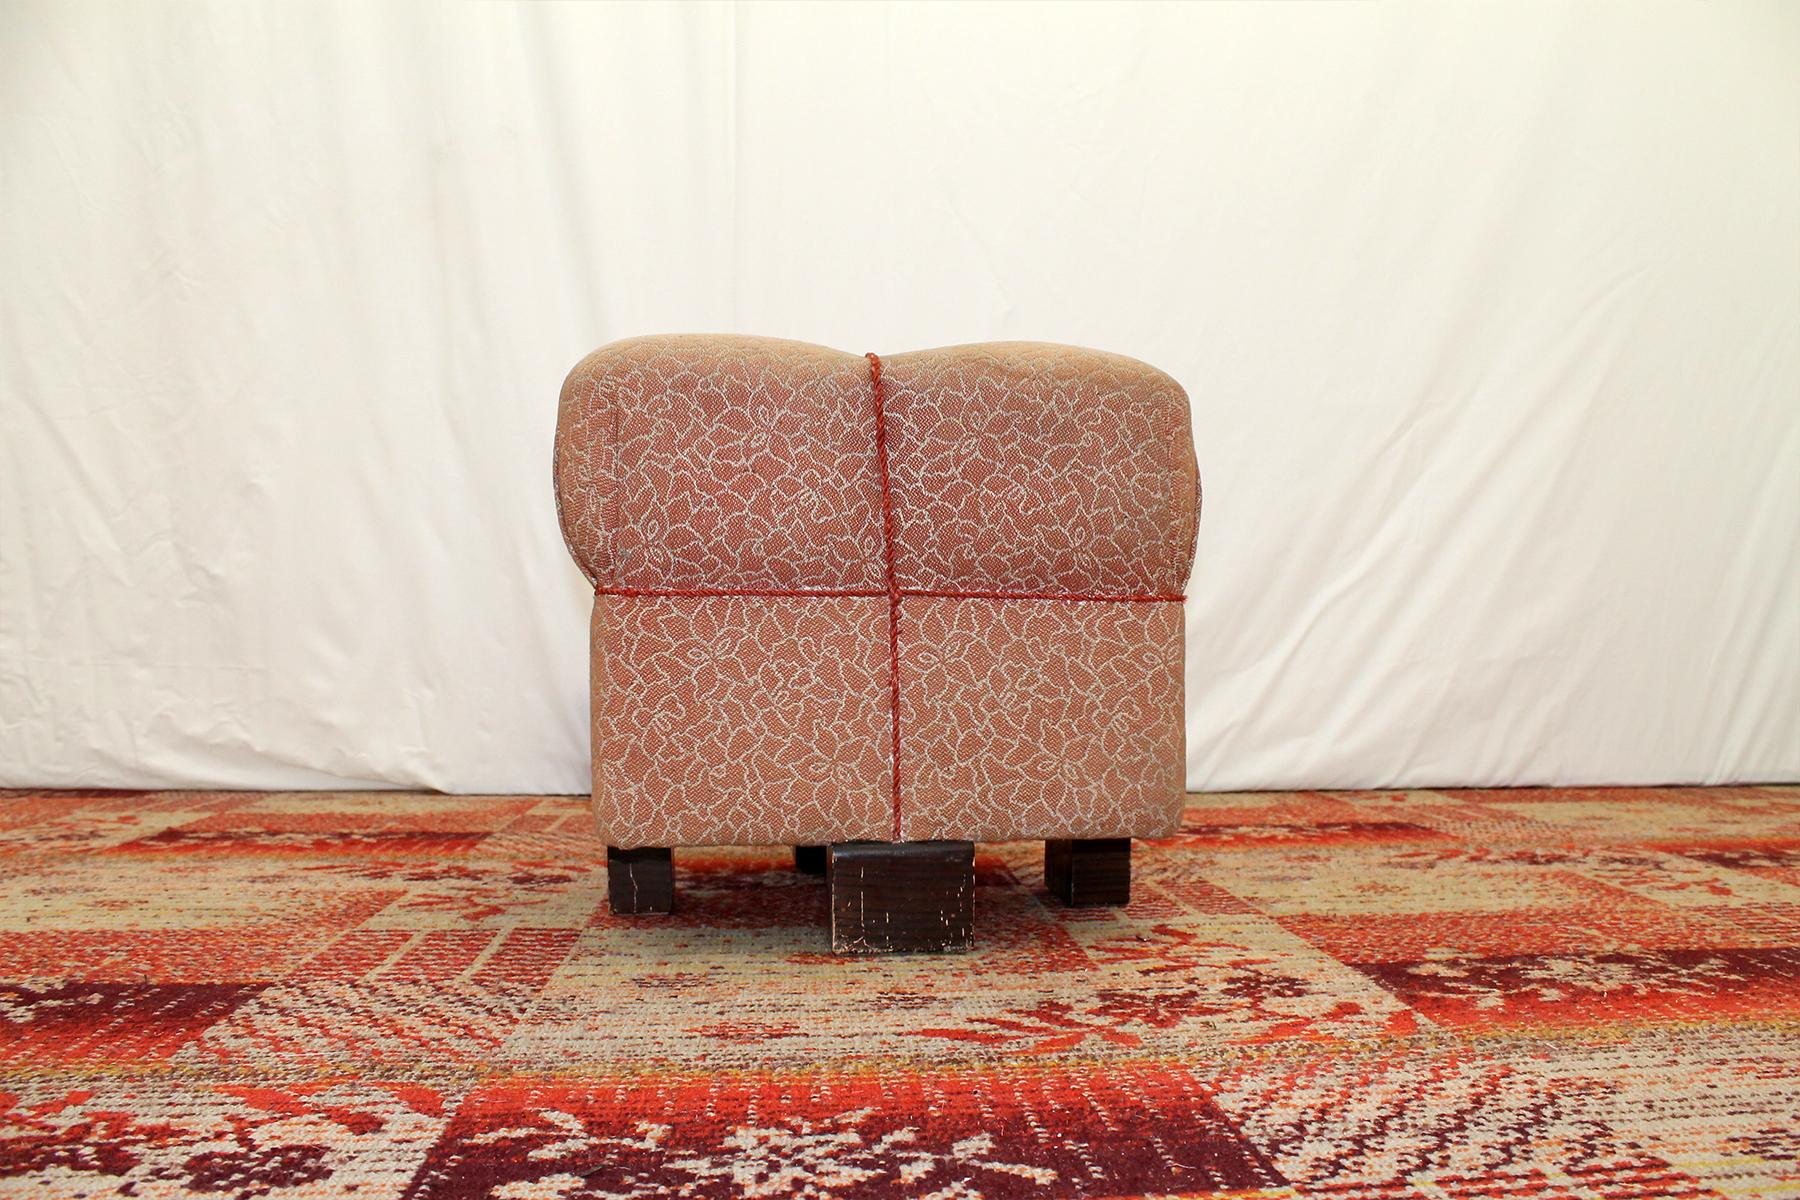 This pouffe (footstool) was designed by Jindrich Halabala and produced by UP Závody in the 1950s. Very comfortable retro chic. The upholstery and the wood showing significant signs of age and using. But the pouffe is stable.